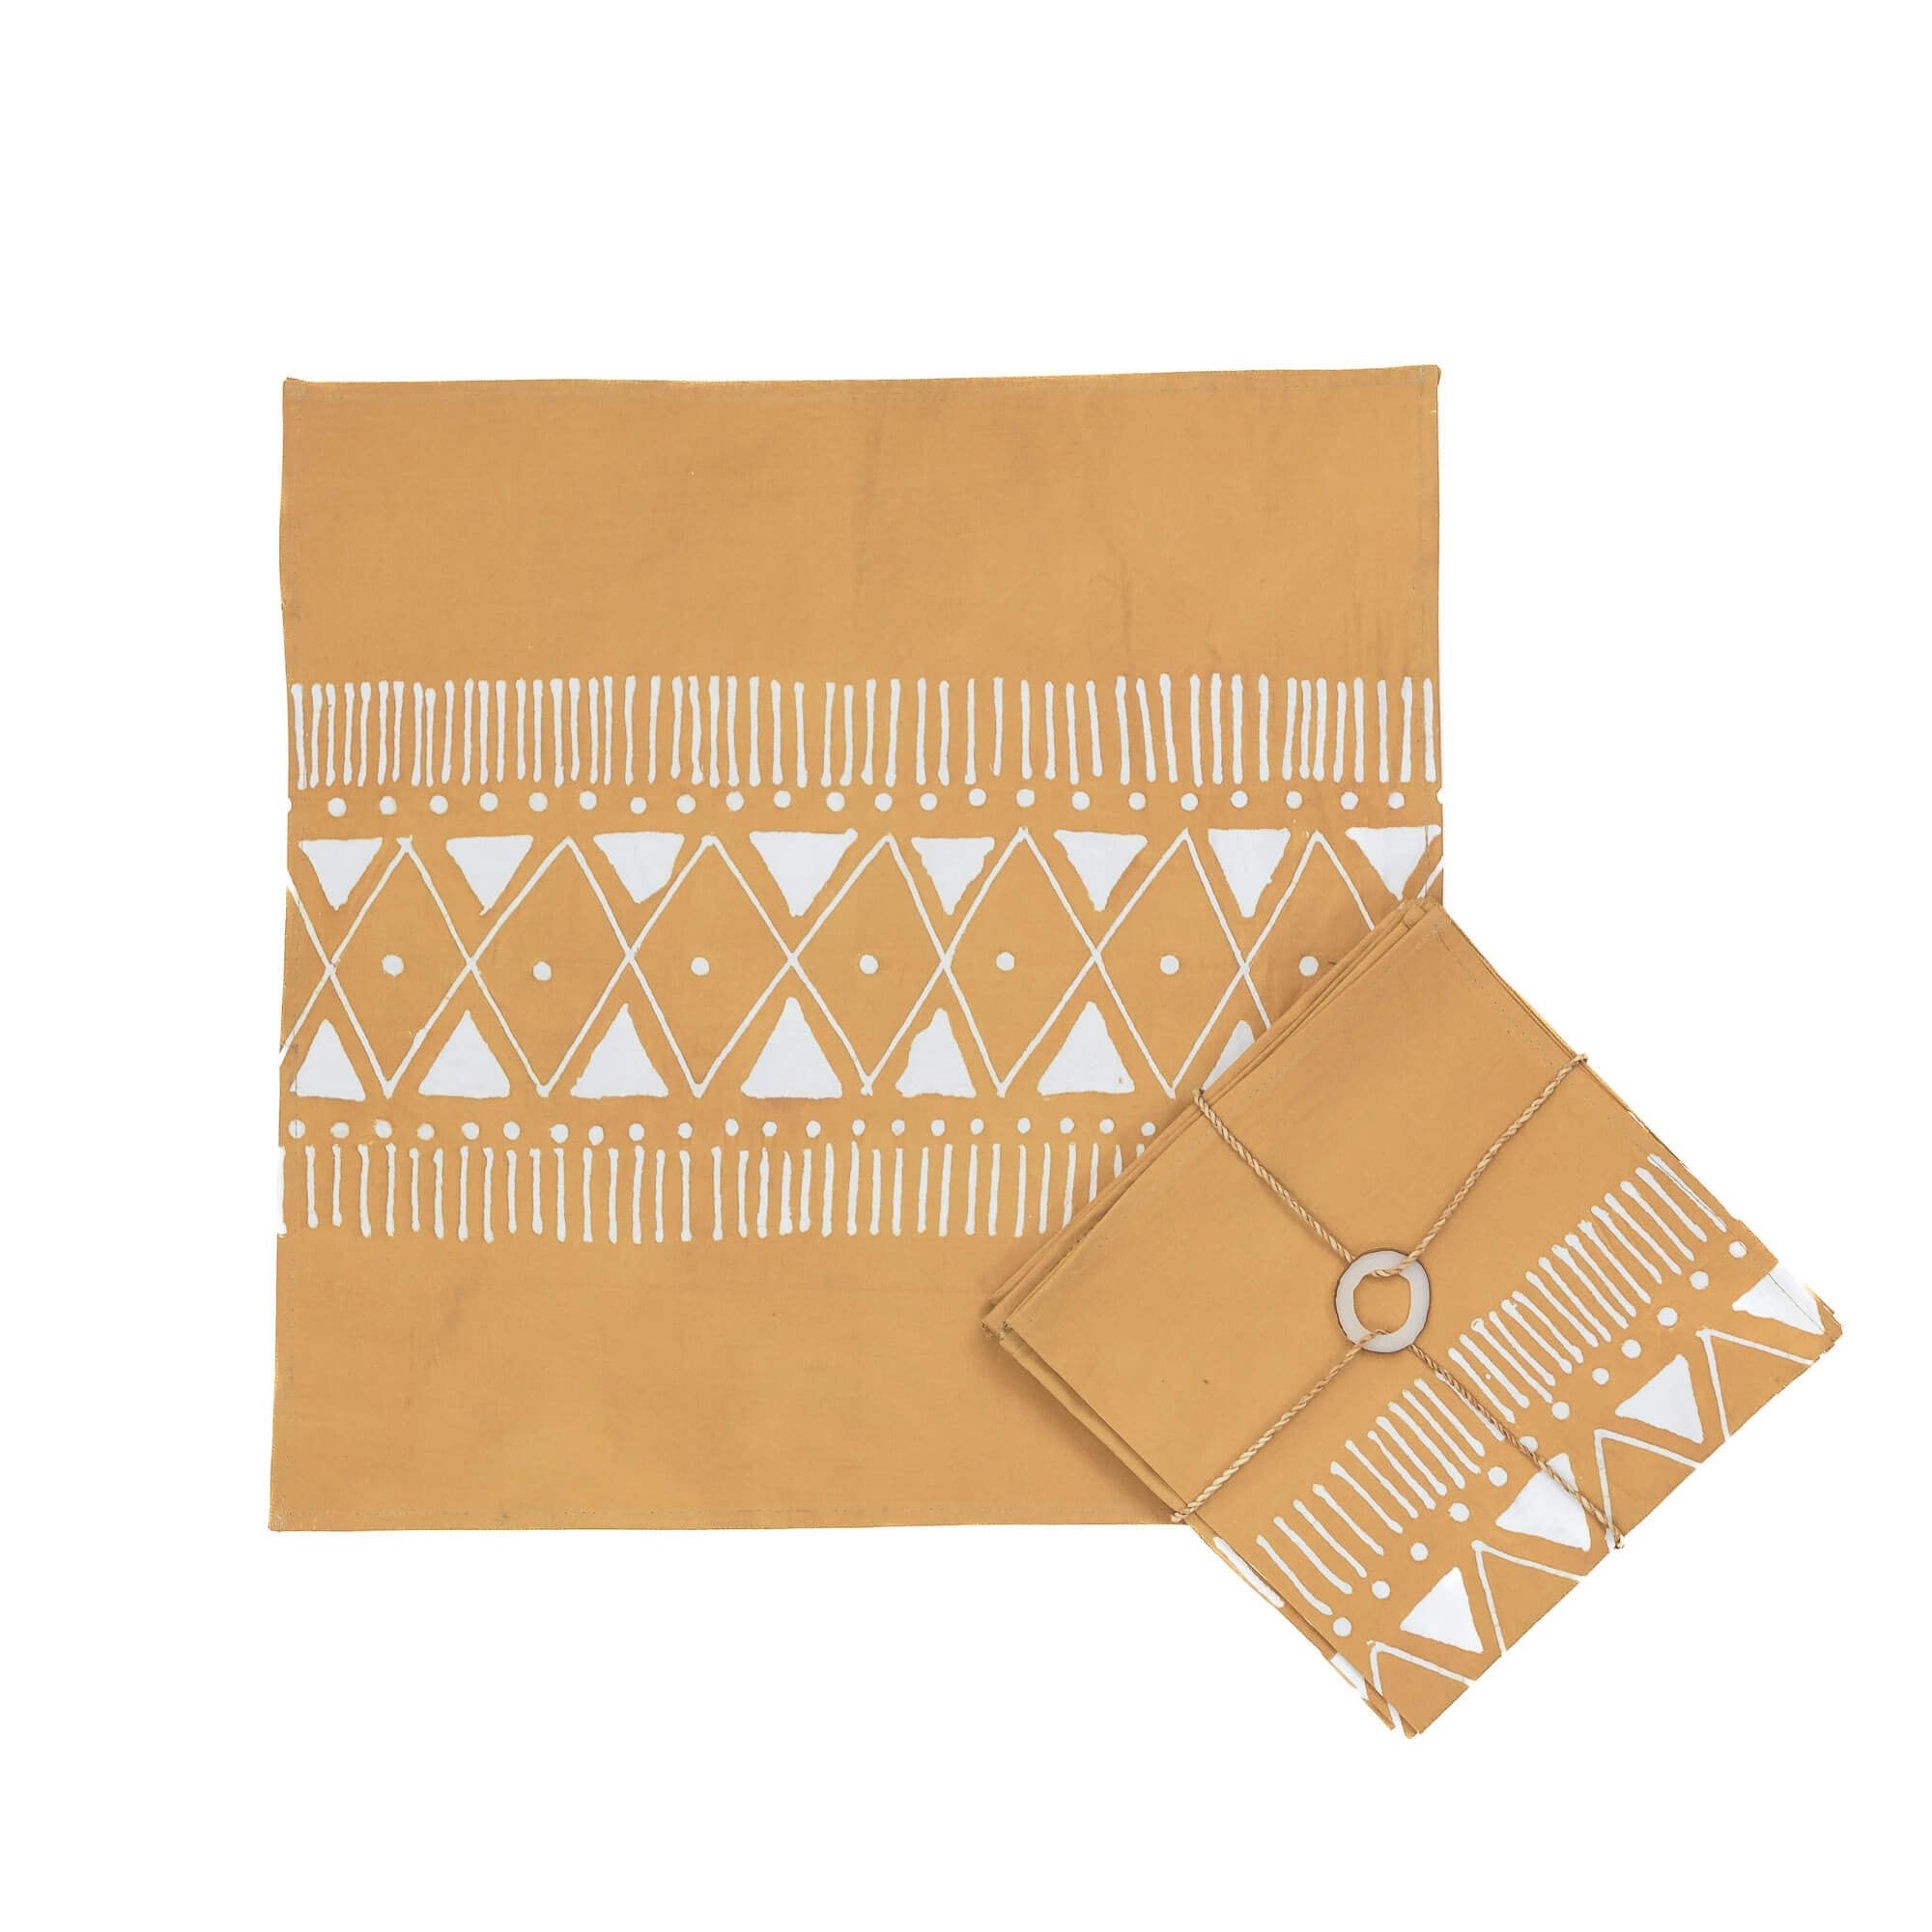 The perfect mustard yellow napkins adorned with intricate detailing, and the perfect commitment to sustainability.